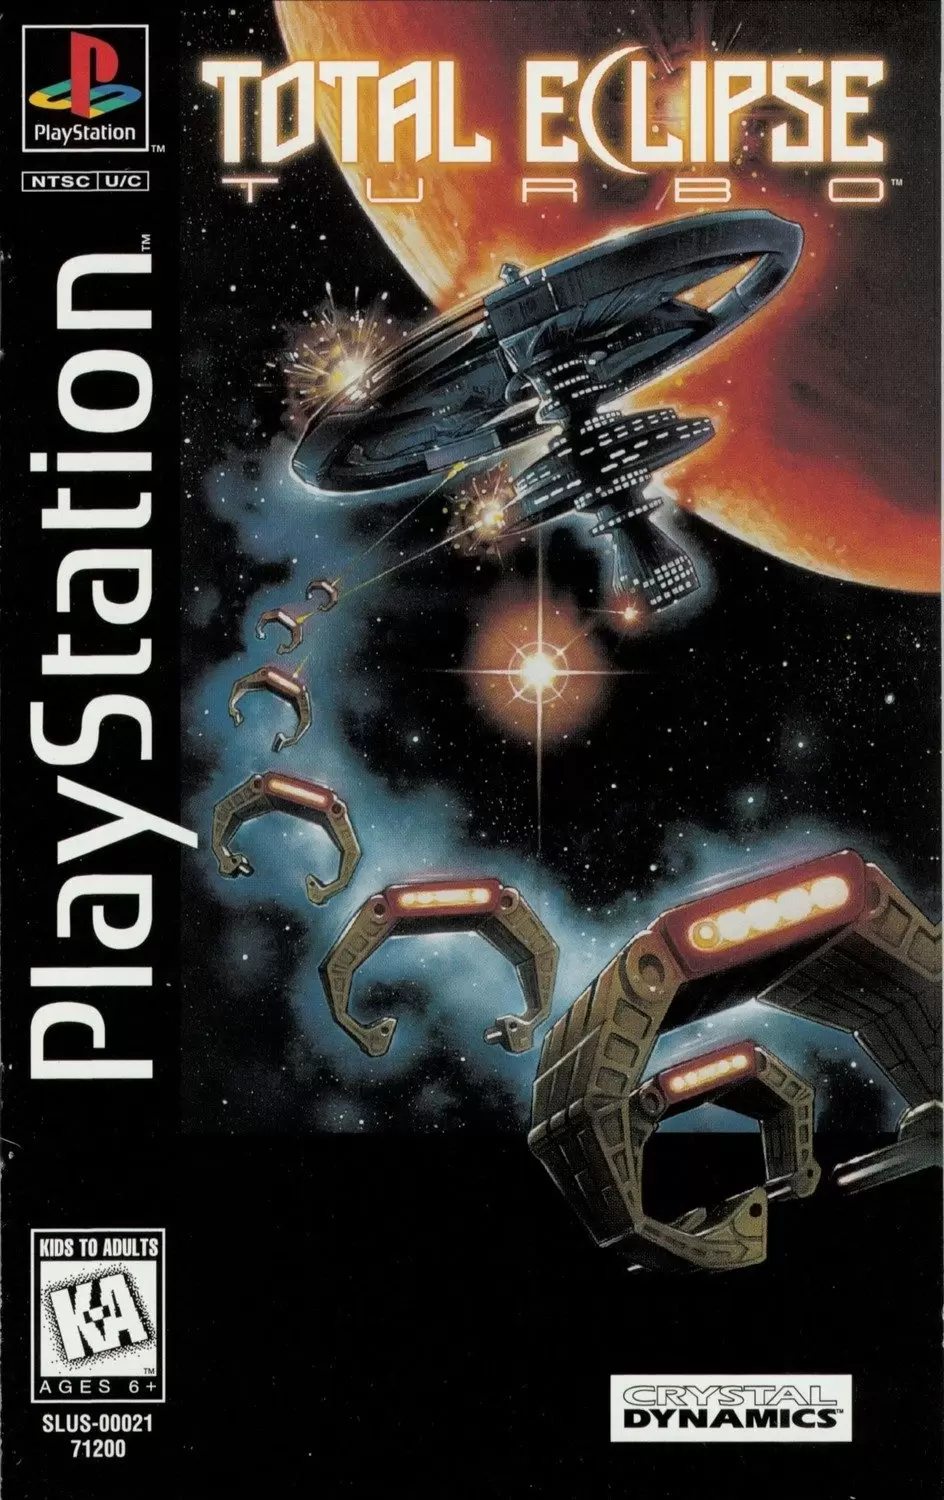 Jeux Playstation PS1 - Total Eclipse Turbo